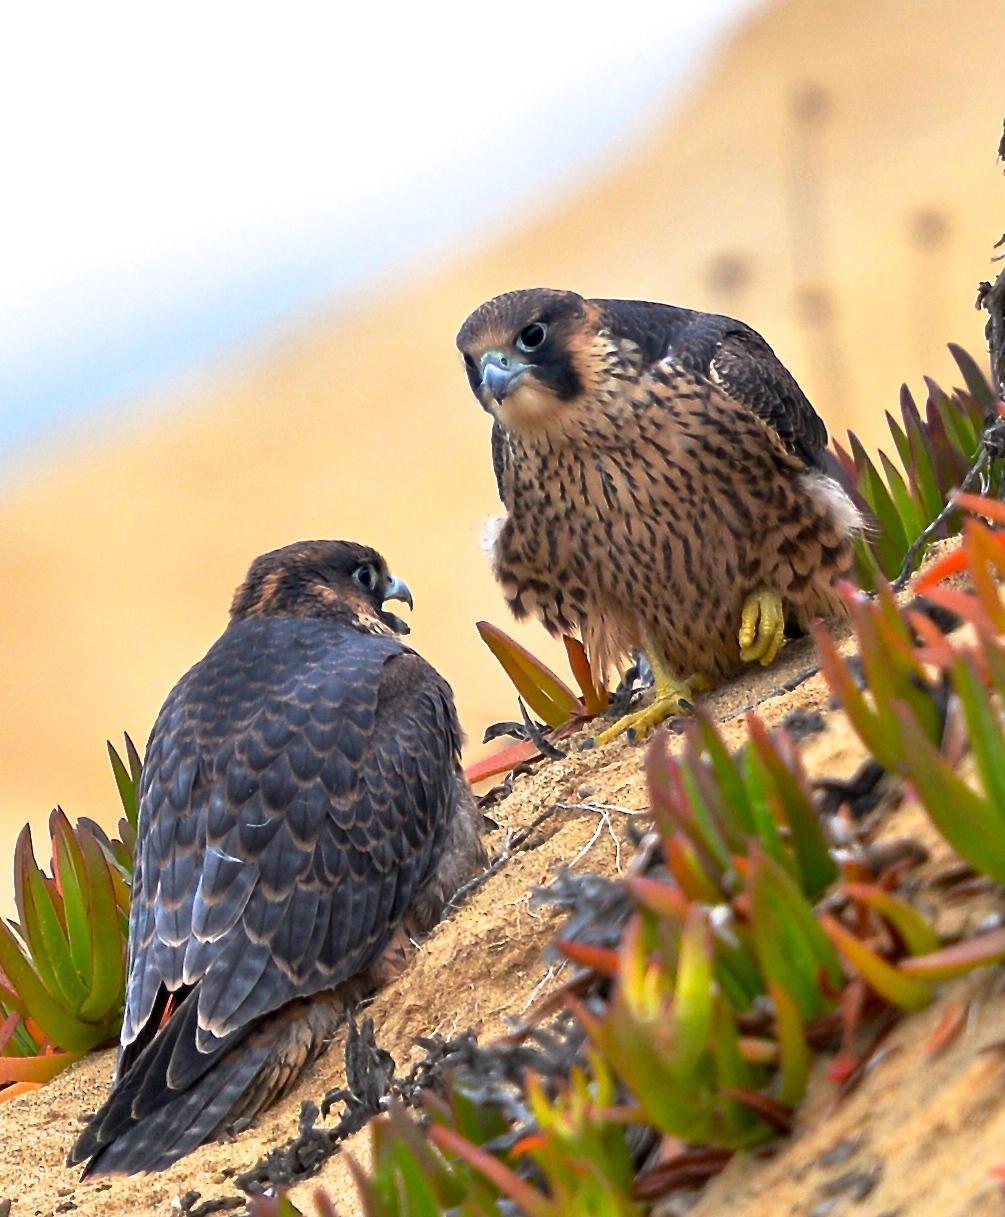 Peregrine Falcon (North American) Photo by Gerald Friesen